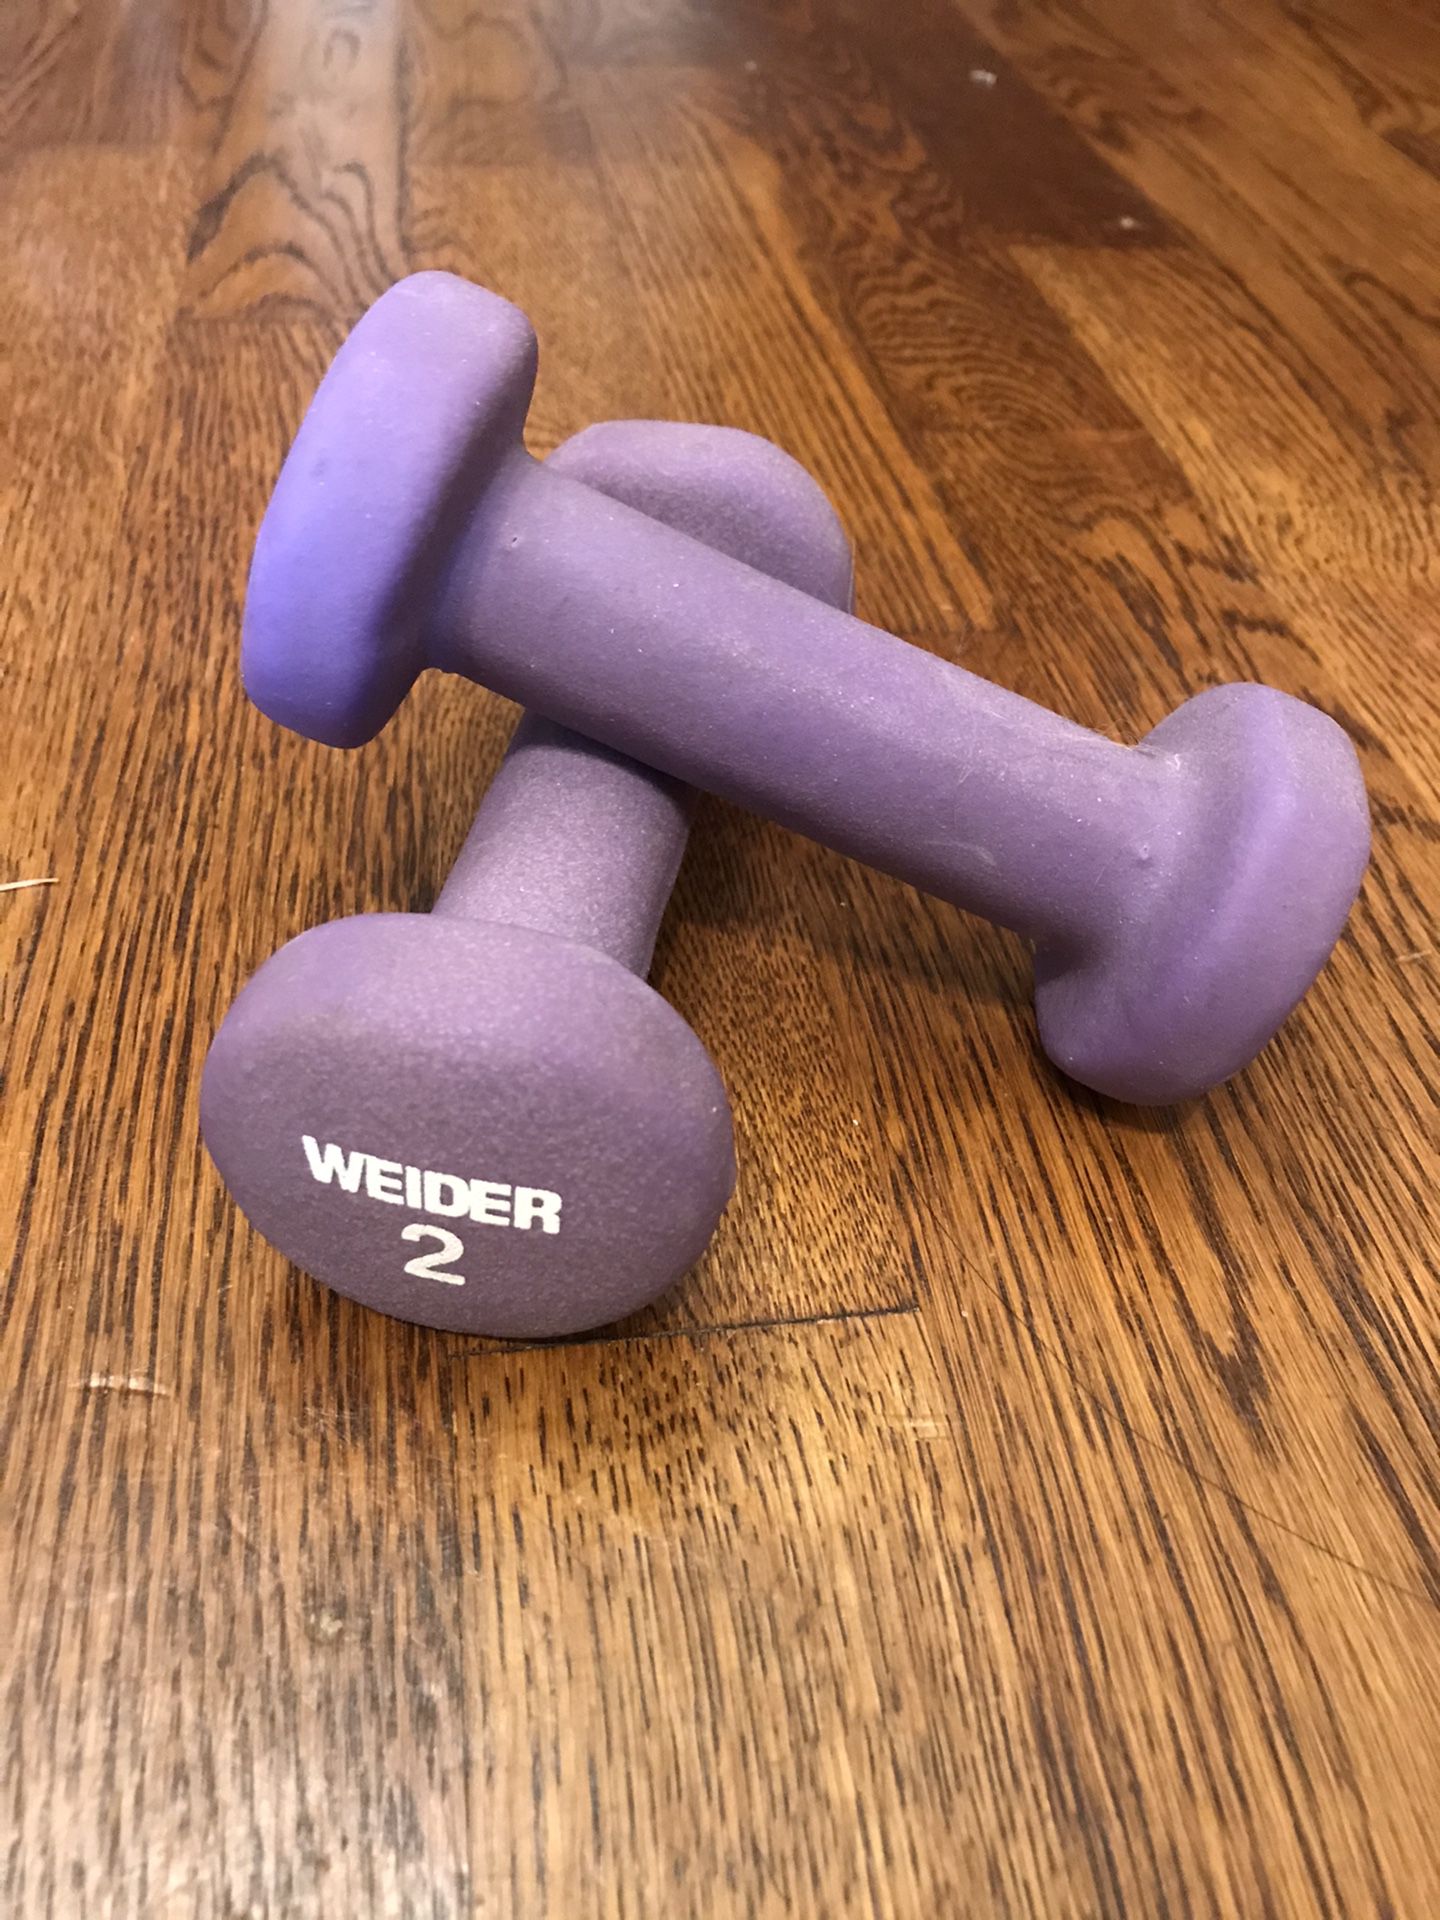 2 lb. hand weights